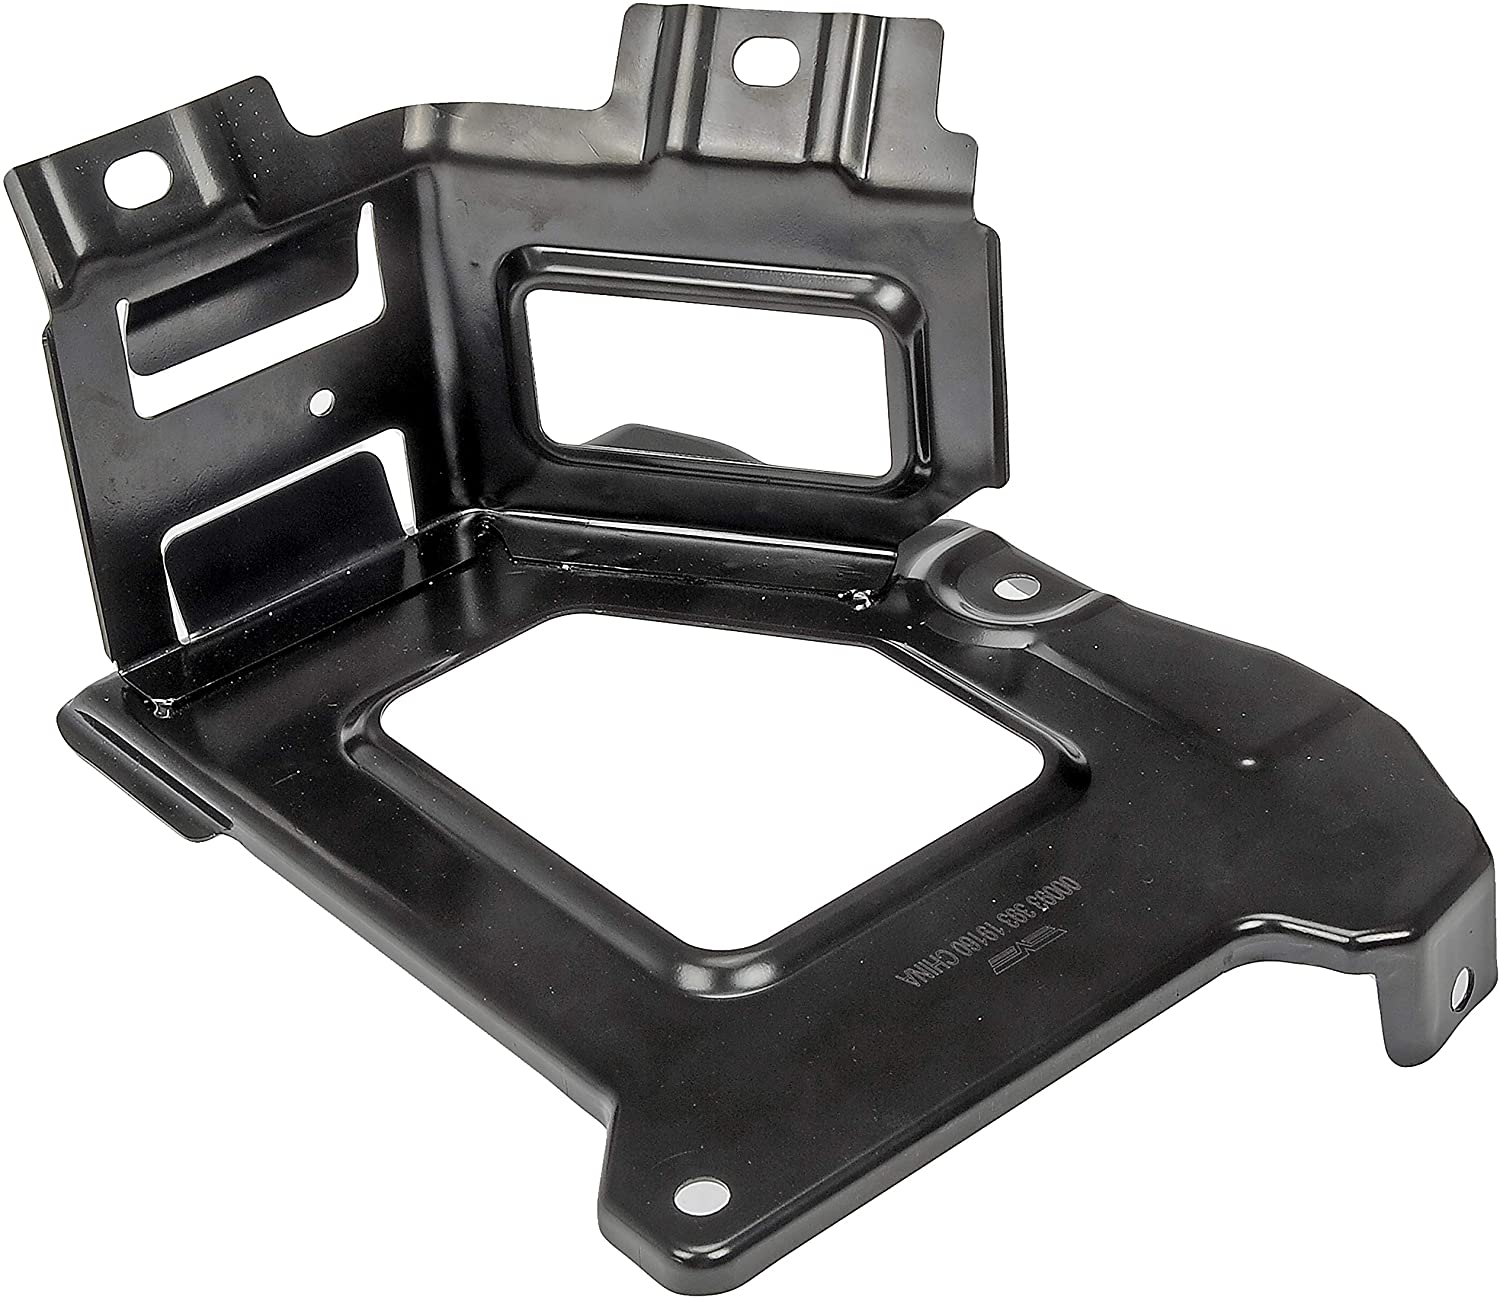 Dorman 00093 Battery Tray Replacement for Select Chevrolet/GMC Models